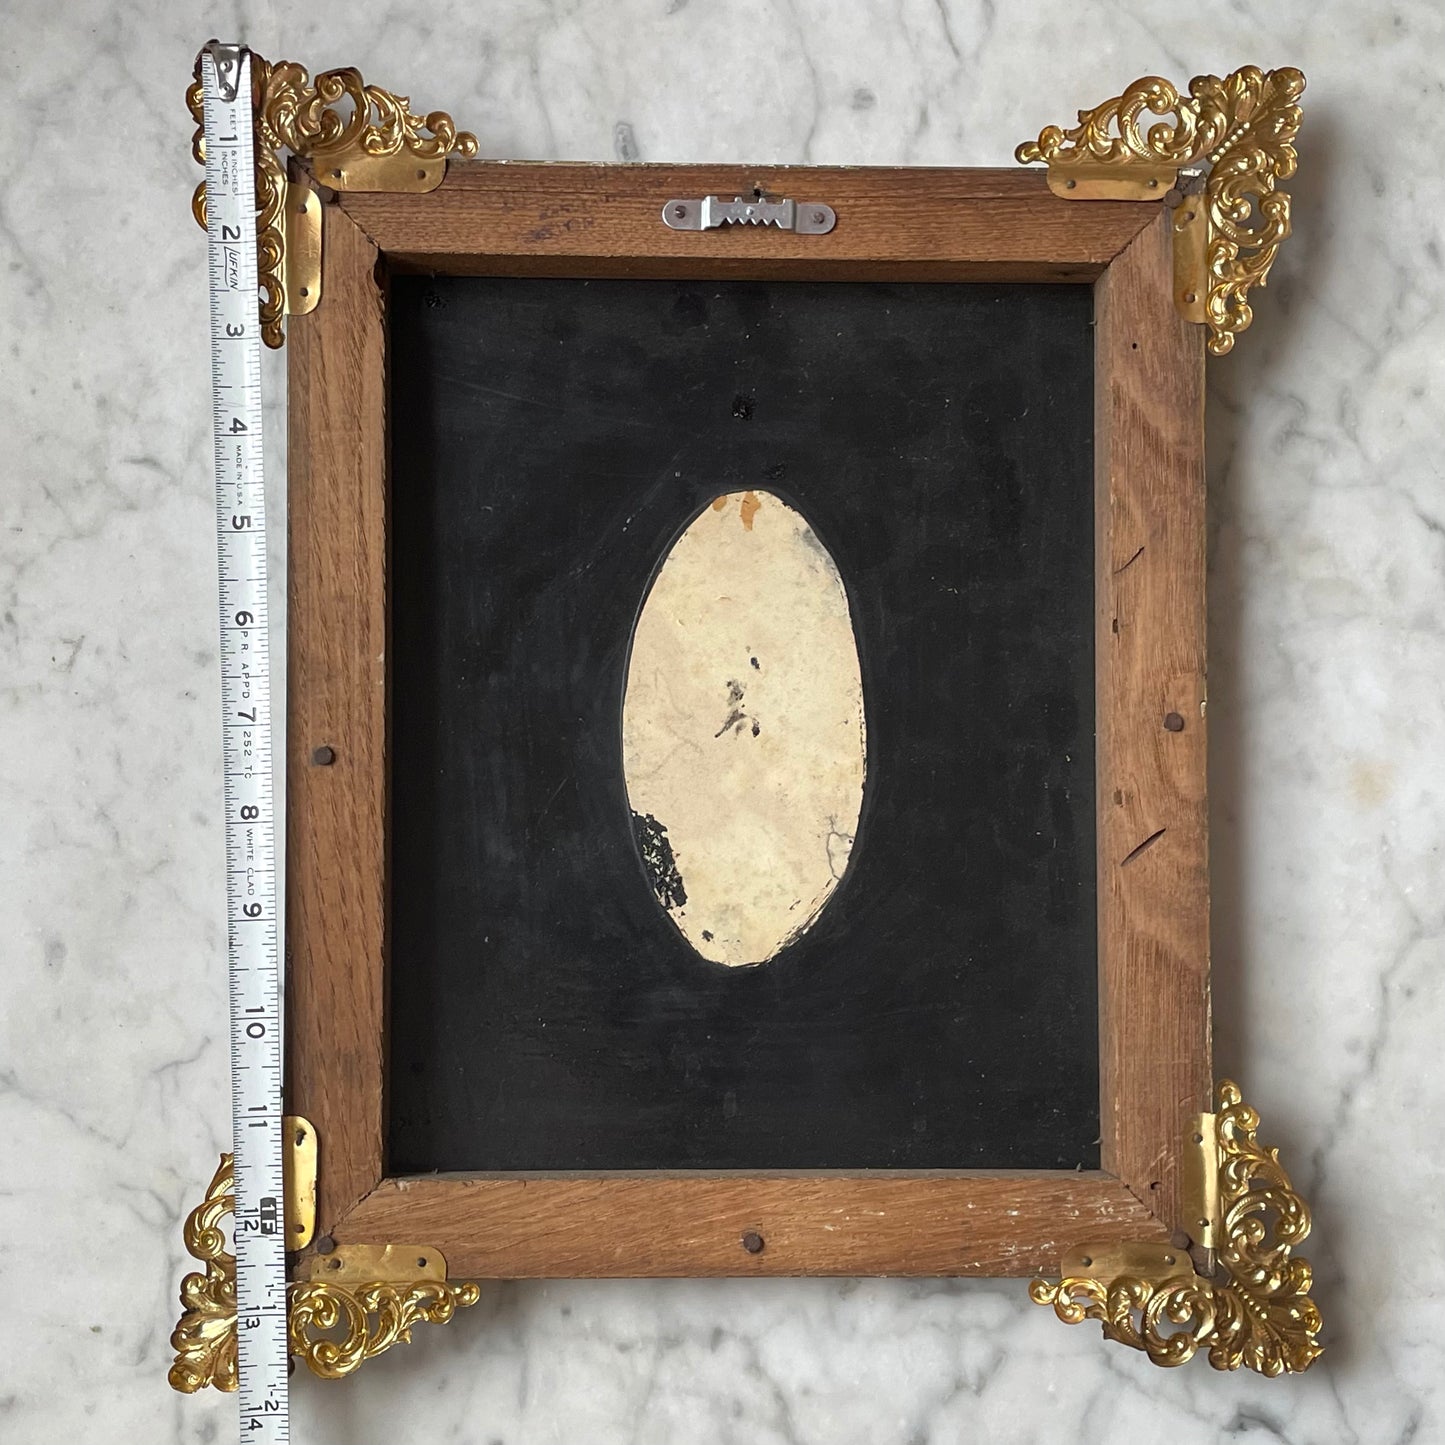 Antique Reverse Painted Glass Photo in Brass Frame